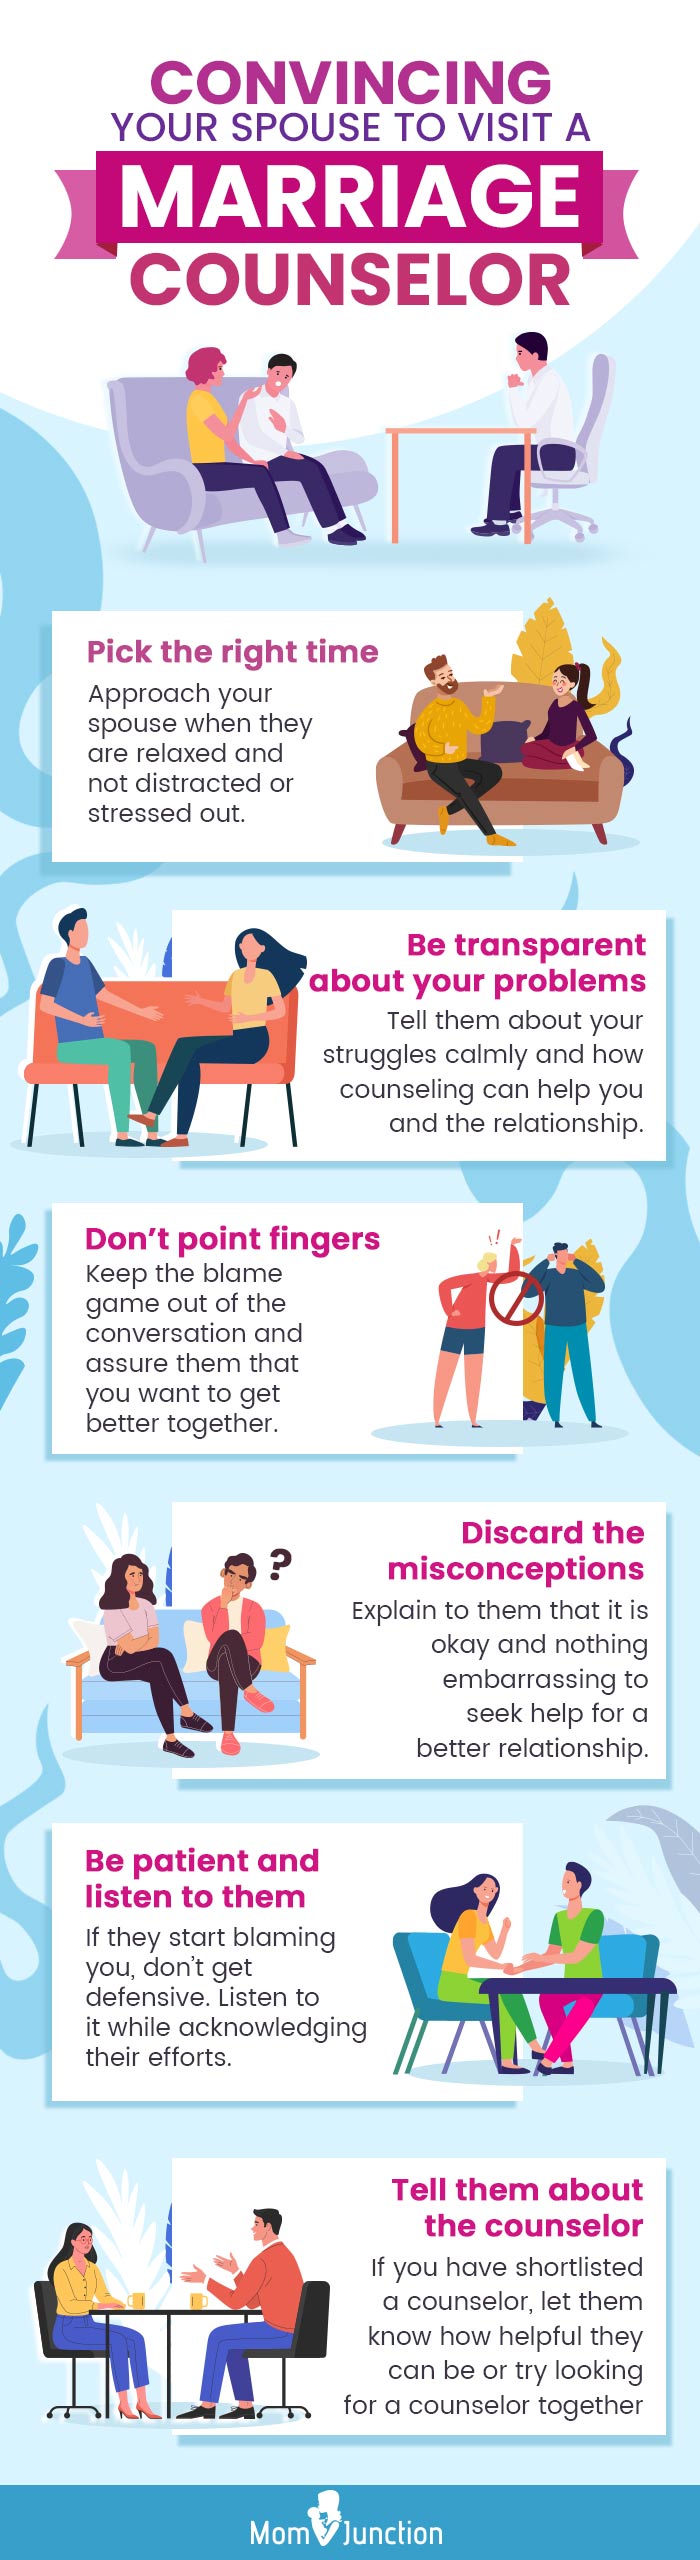 convincing your spouse to visit a marriage counselor [infographic]